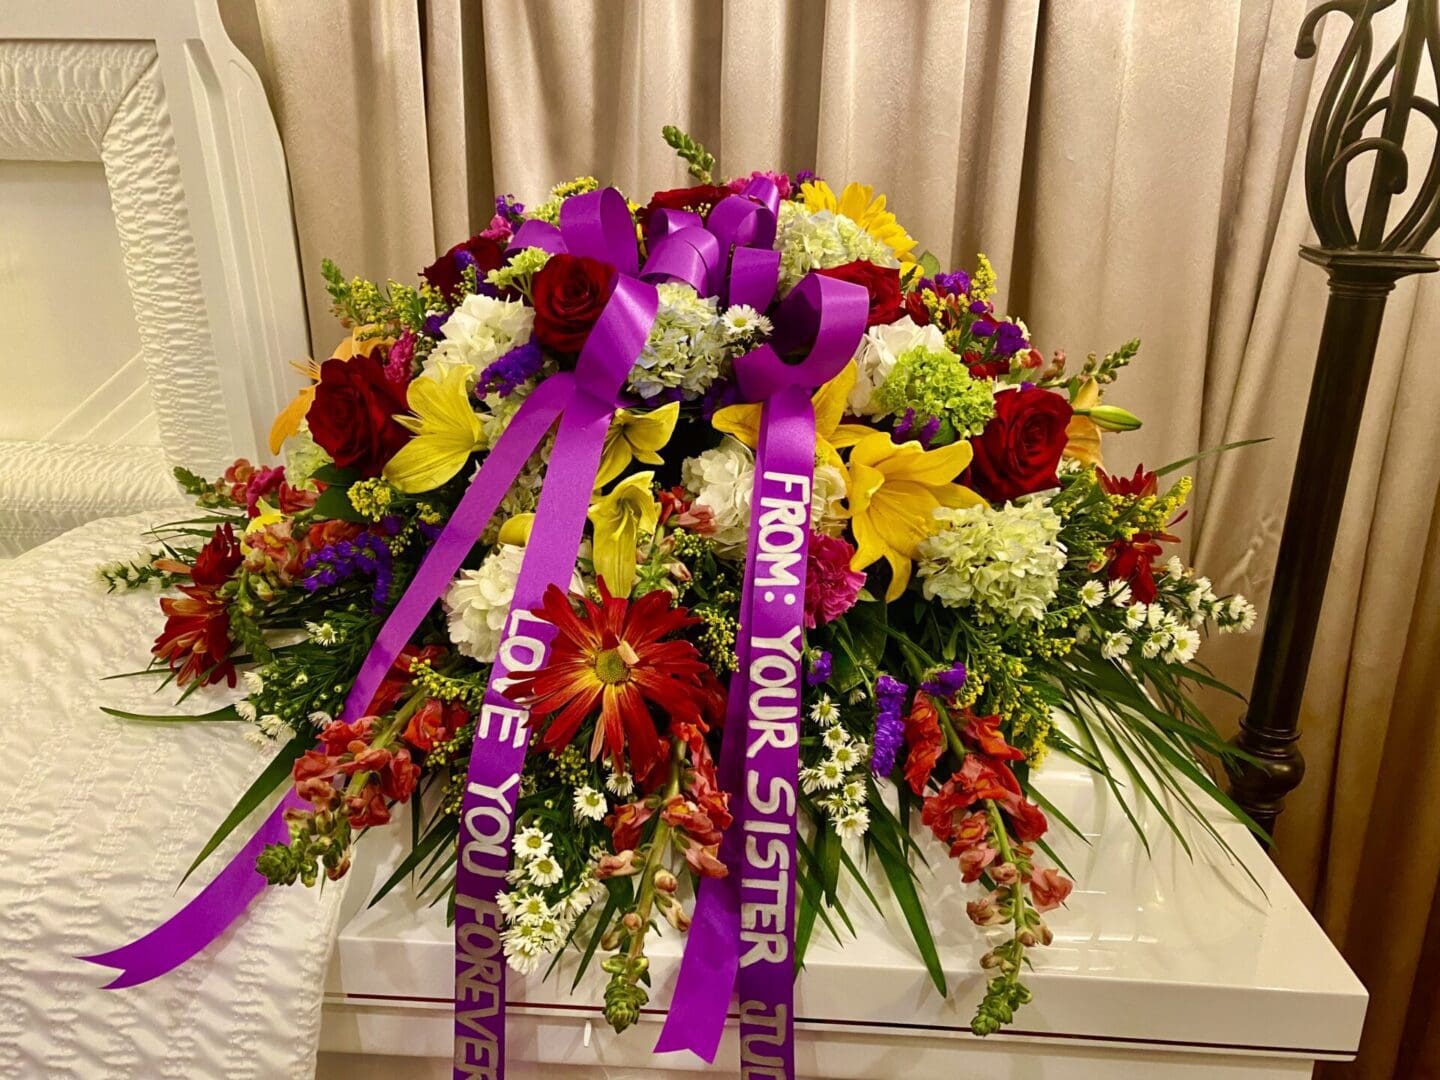 Gregory casket flowers with ribbons